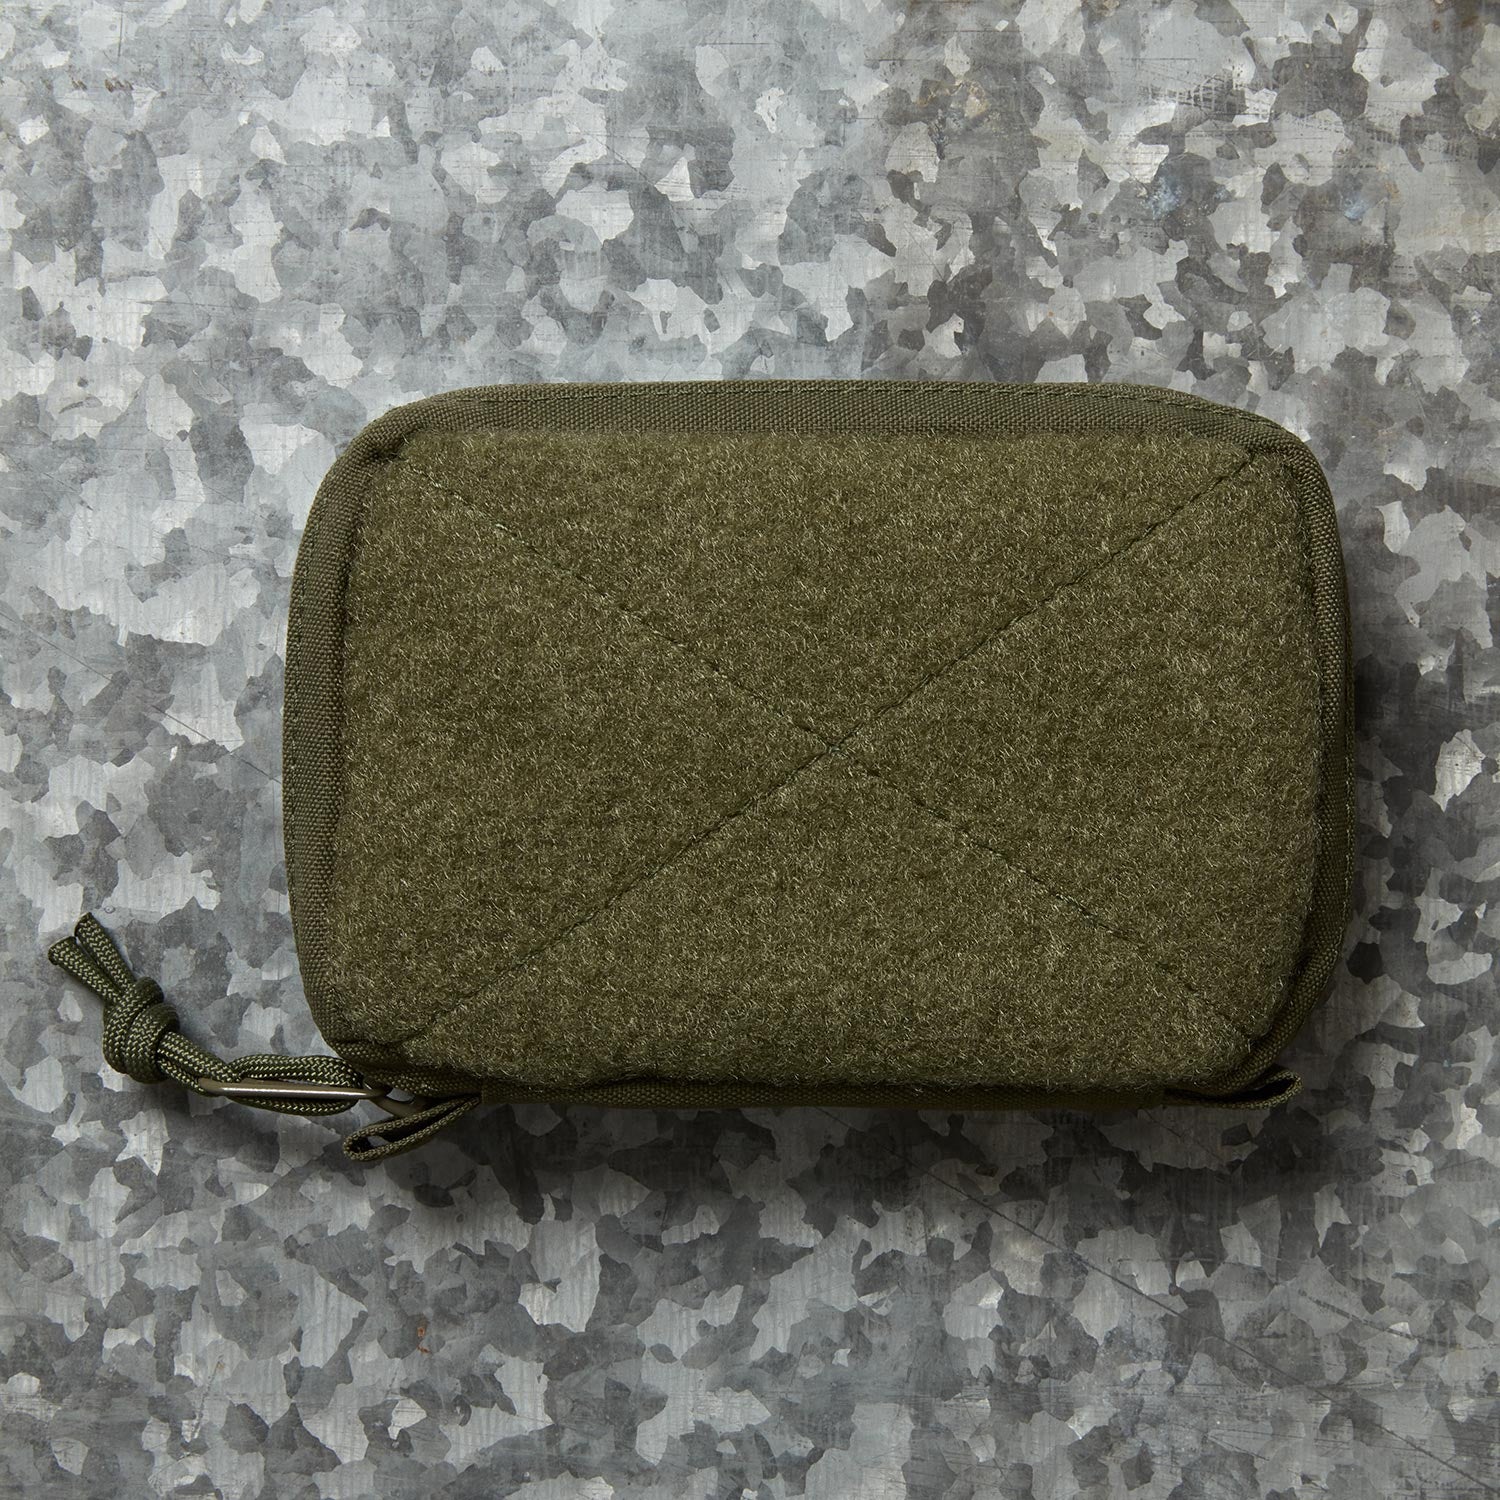 All Good Pouch - OD Green